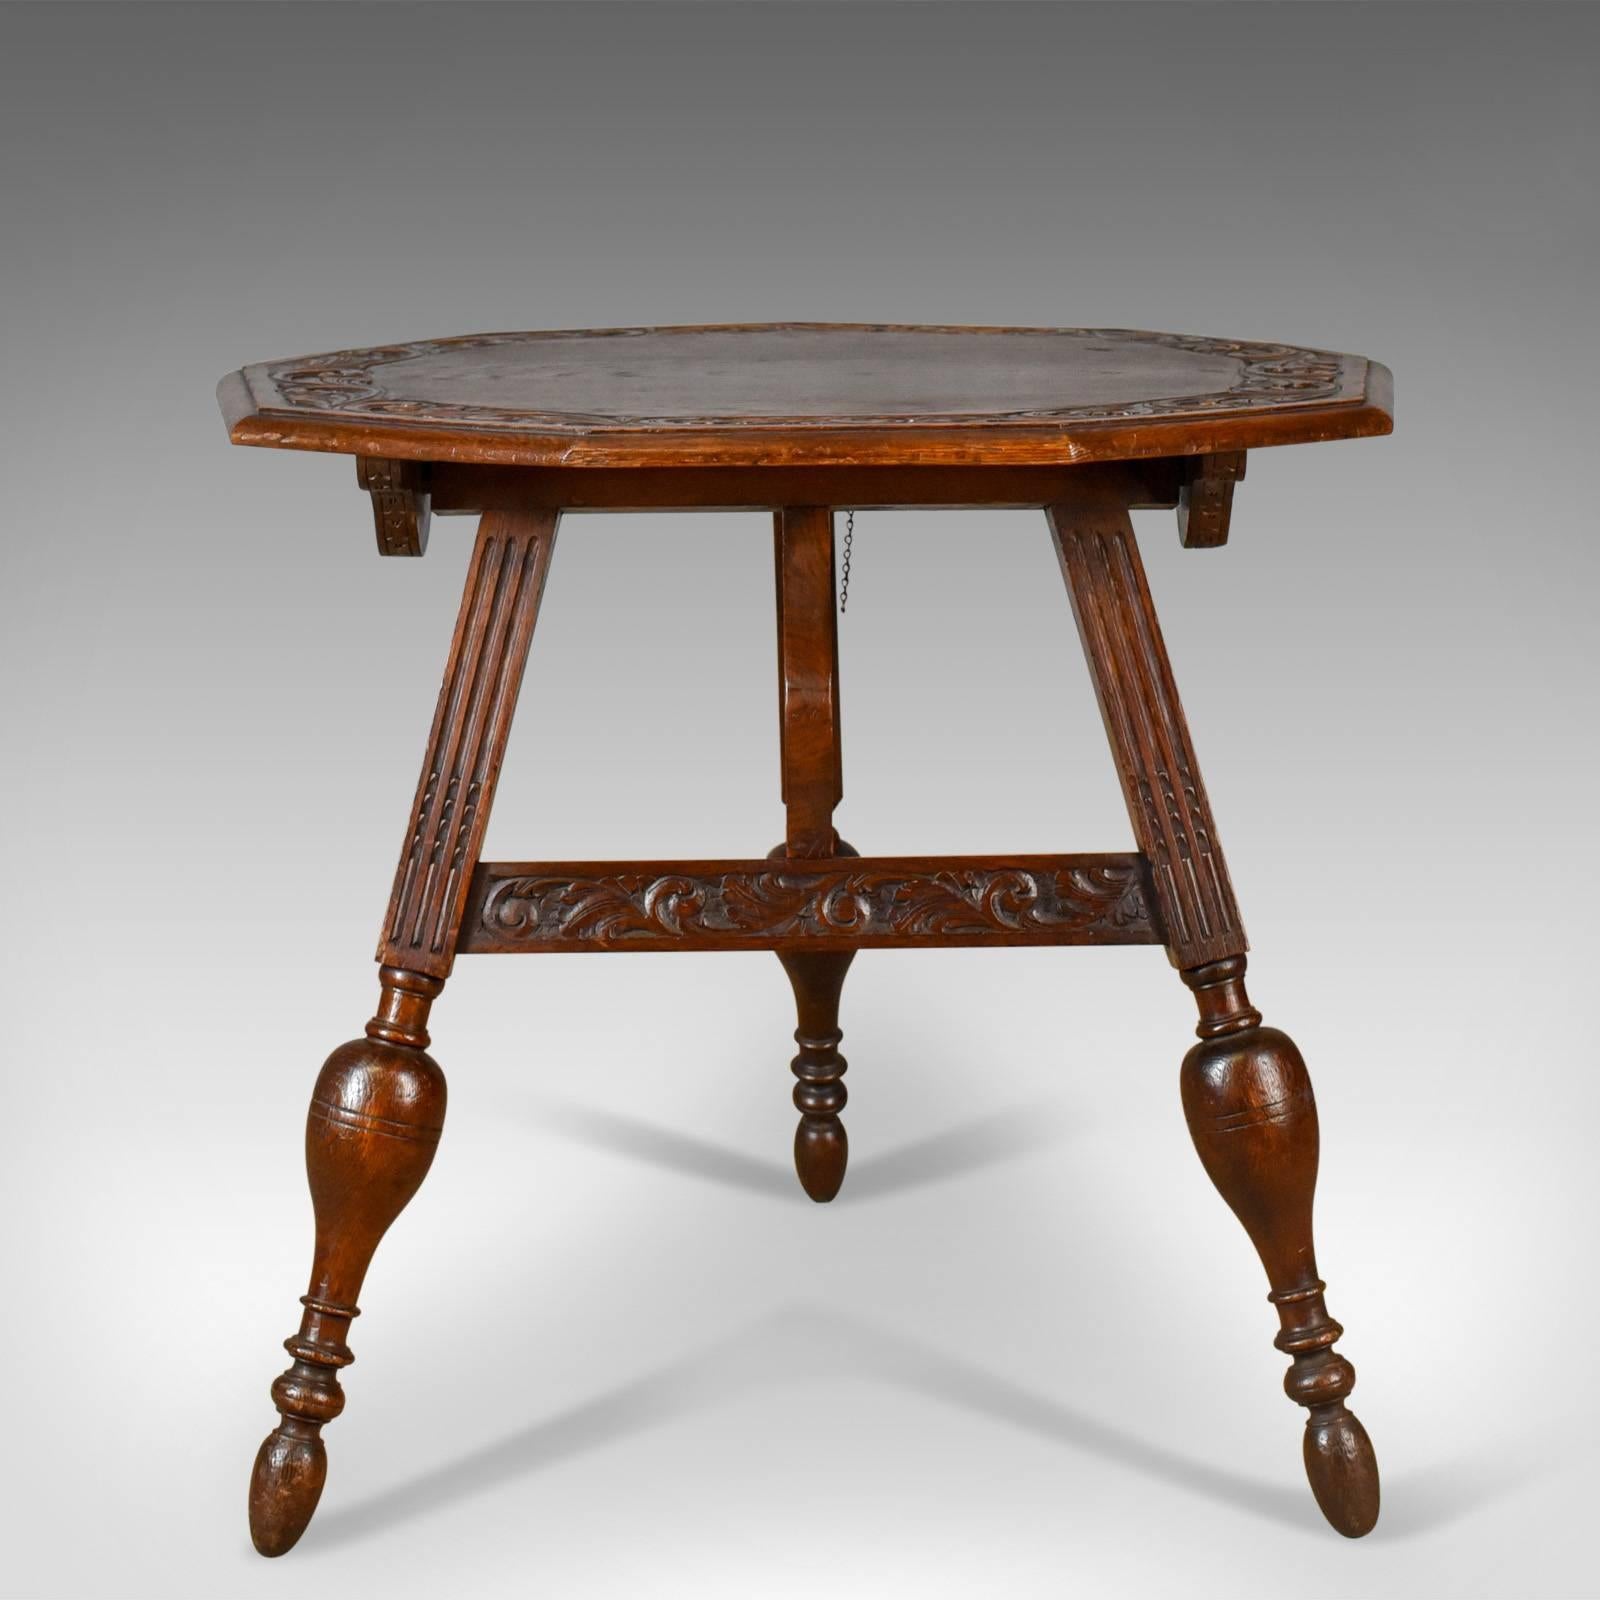 This is an antique folding table, a Dutch piece from Friesland in the North West Region of the Netherlands. In oak, a ship's, tavern or campaign table from the 19th century, circa 1880.

Fine Dutch styling presented in good antique